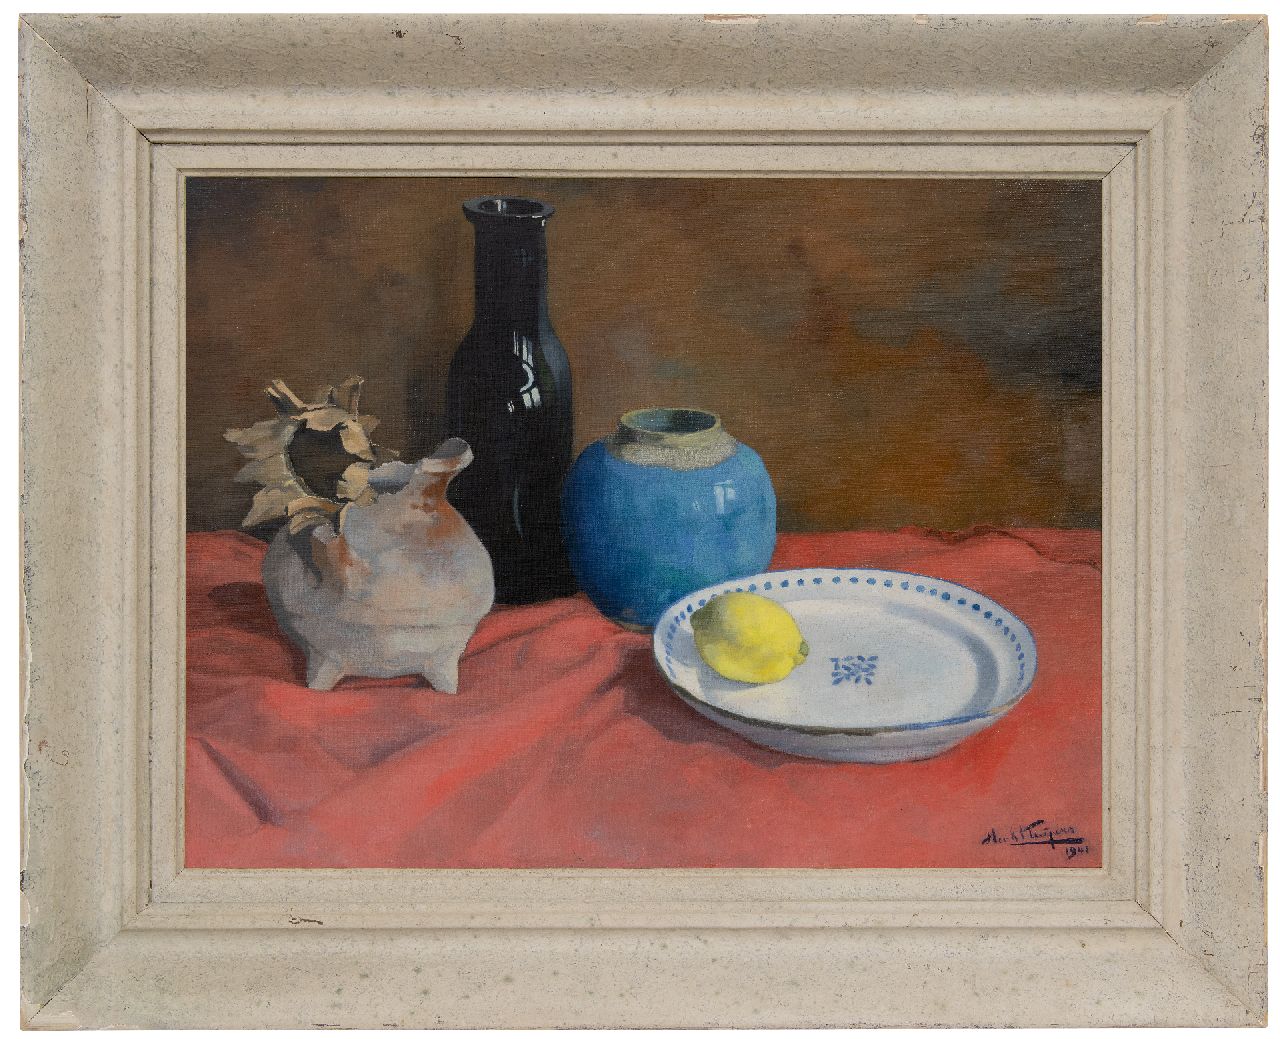 Kuipers H.J.  | Hendricus Jacobus 'Henk' Kuipers | Paintings offered for sale | A still life with tableware and a lemon, oil on canvas 45.7 x 60.5 cm, signed l.r. and dated 1941